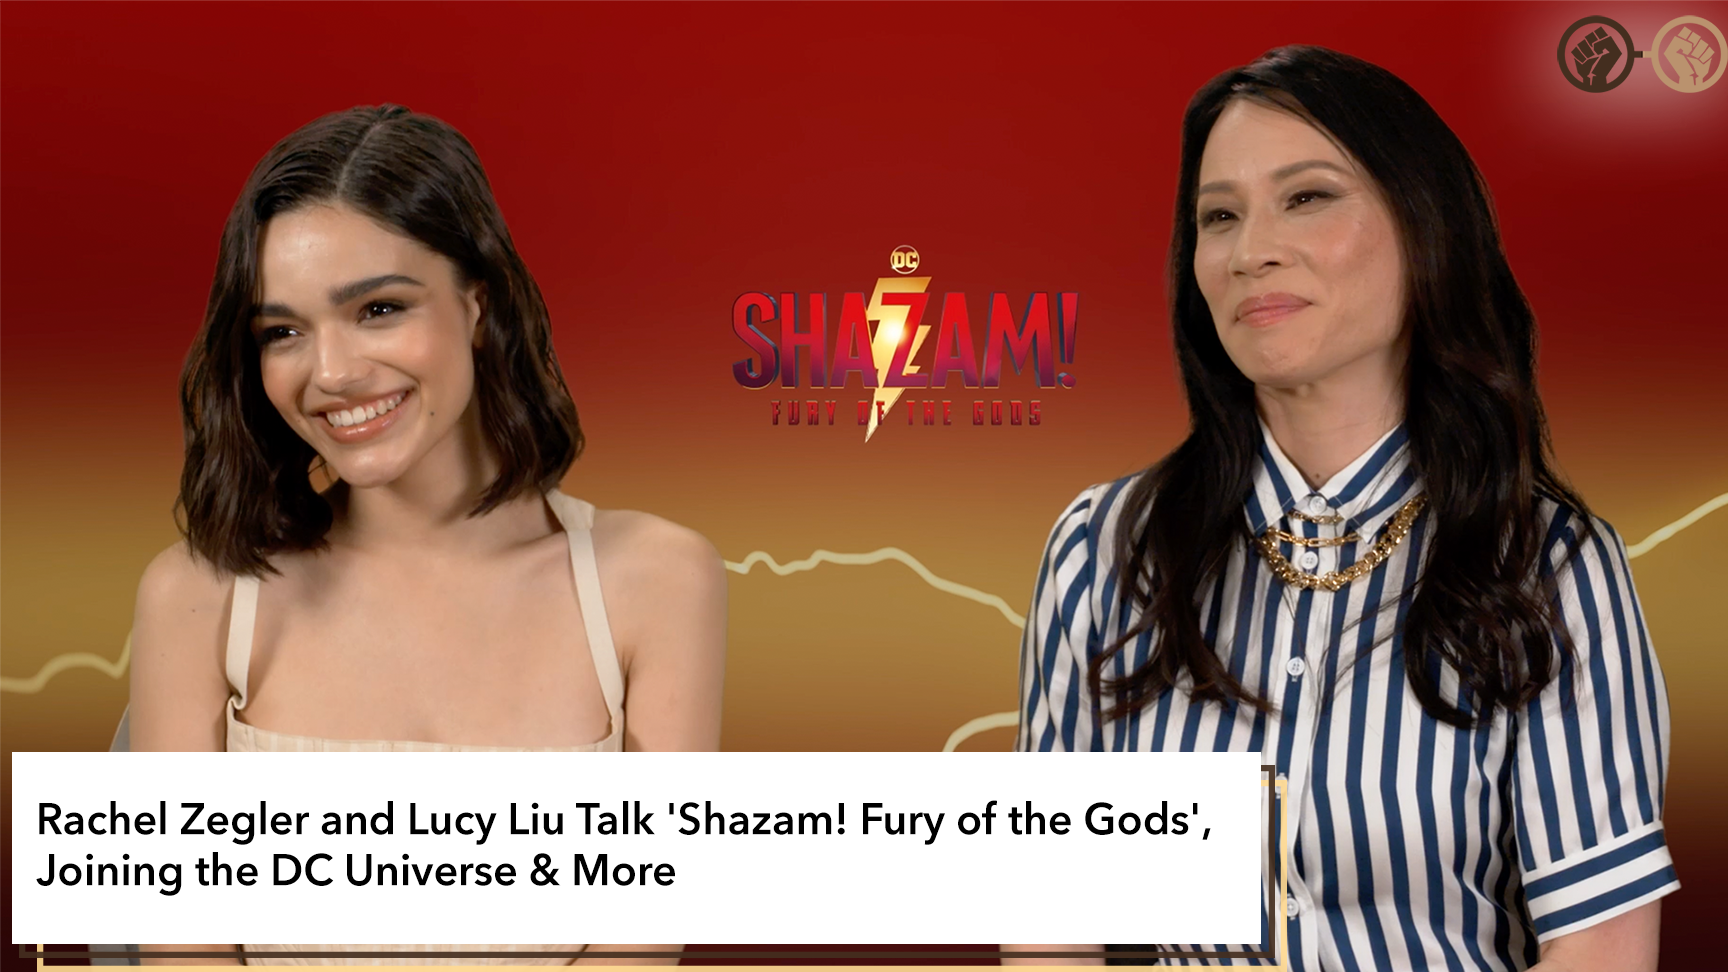 Rachel Zegler and Lucy Liu Talk ‘Shazam! Fury of the Gods’, Joining The DC Universe & More – Interview